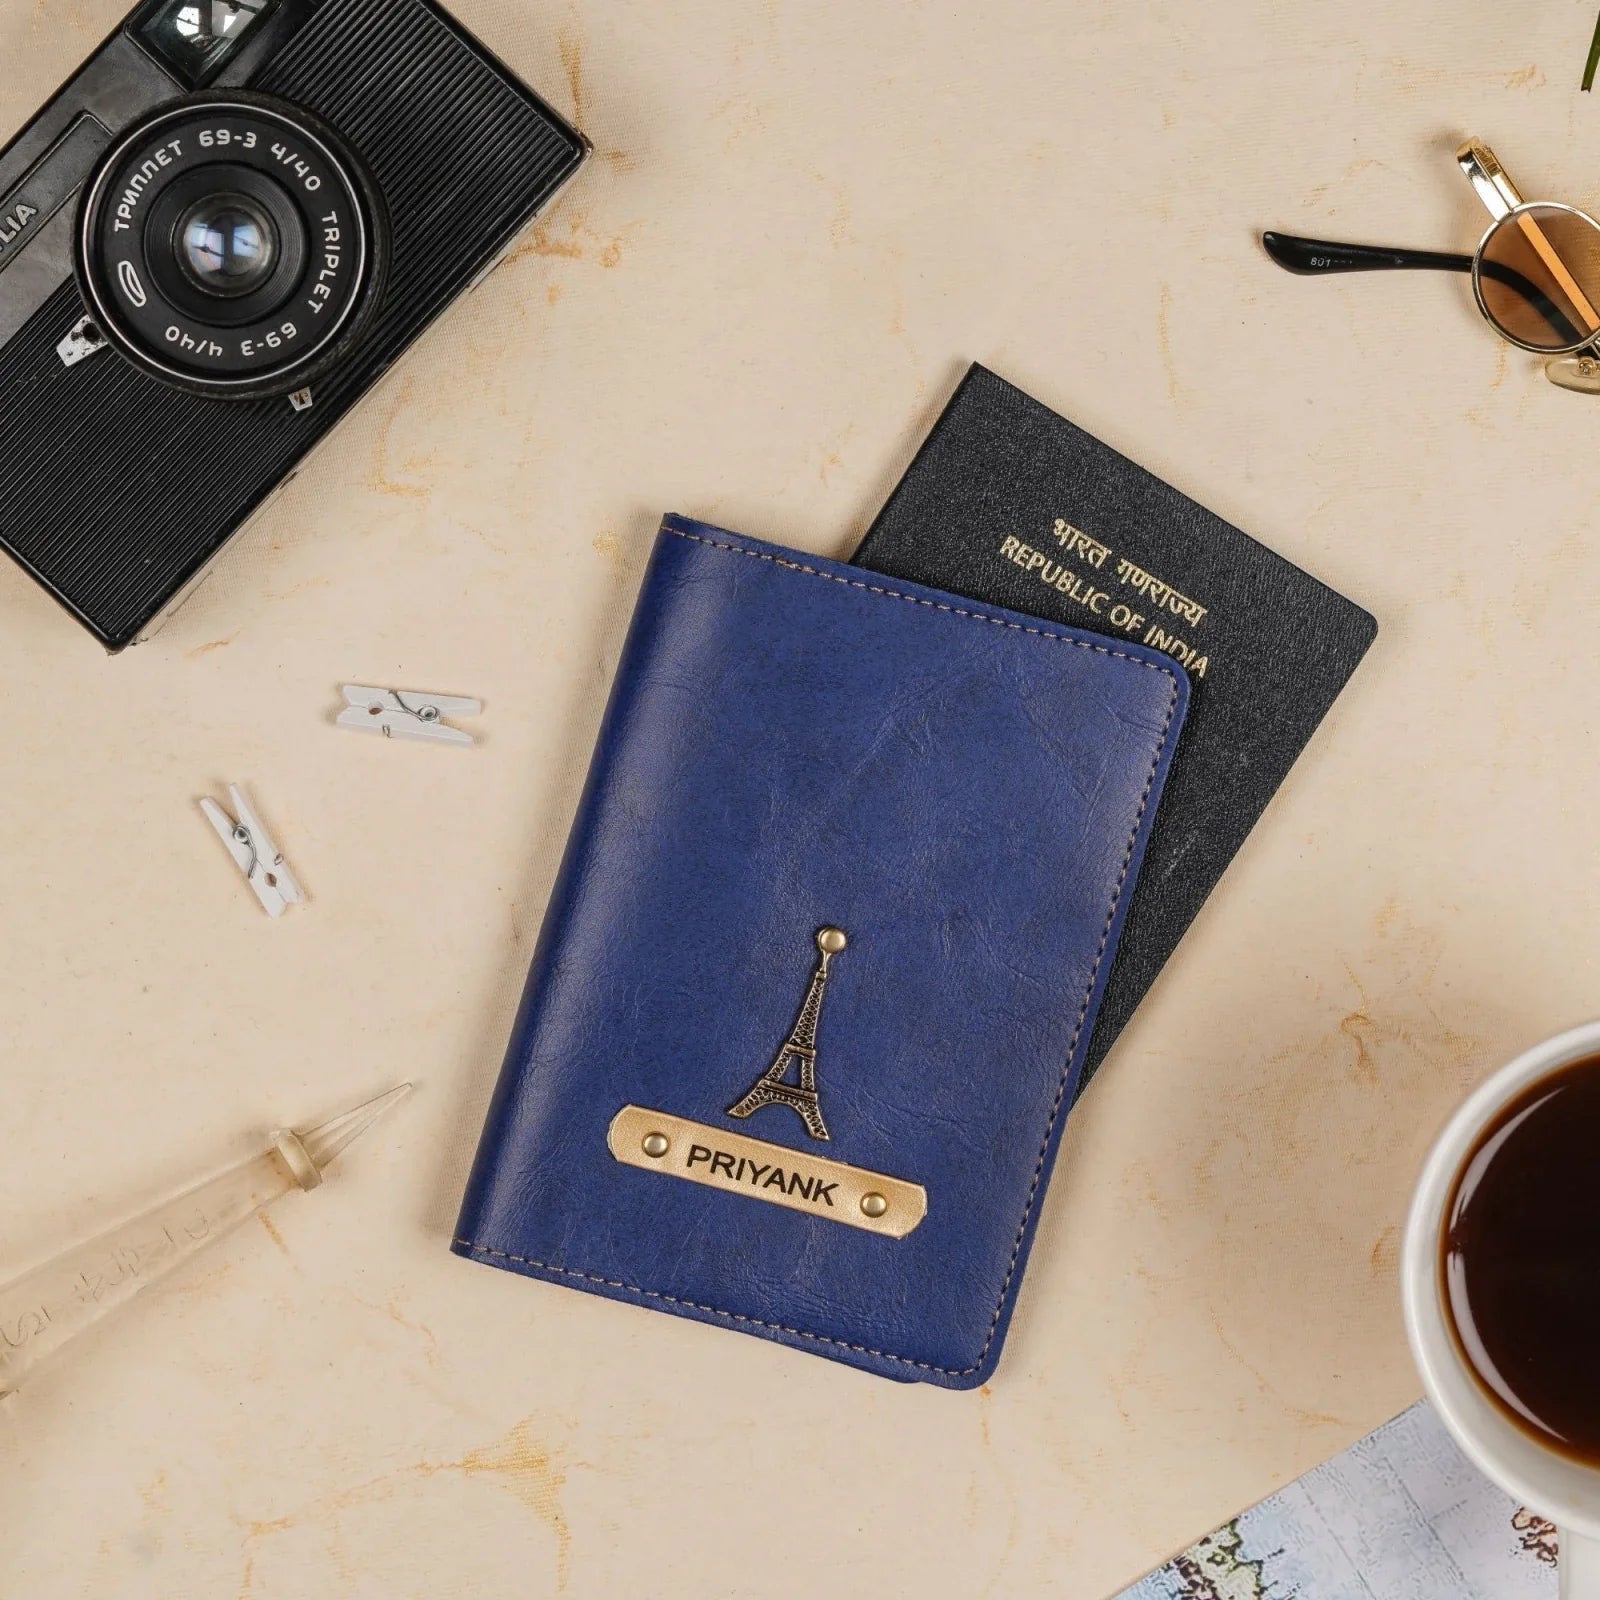 Elevate your travel essentials with our custom passport cover! This cover is made from high-quality materials and features a sleek, modern design, making it the perfect choice for anyone looking for a stylish and practical accessory.